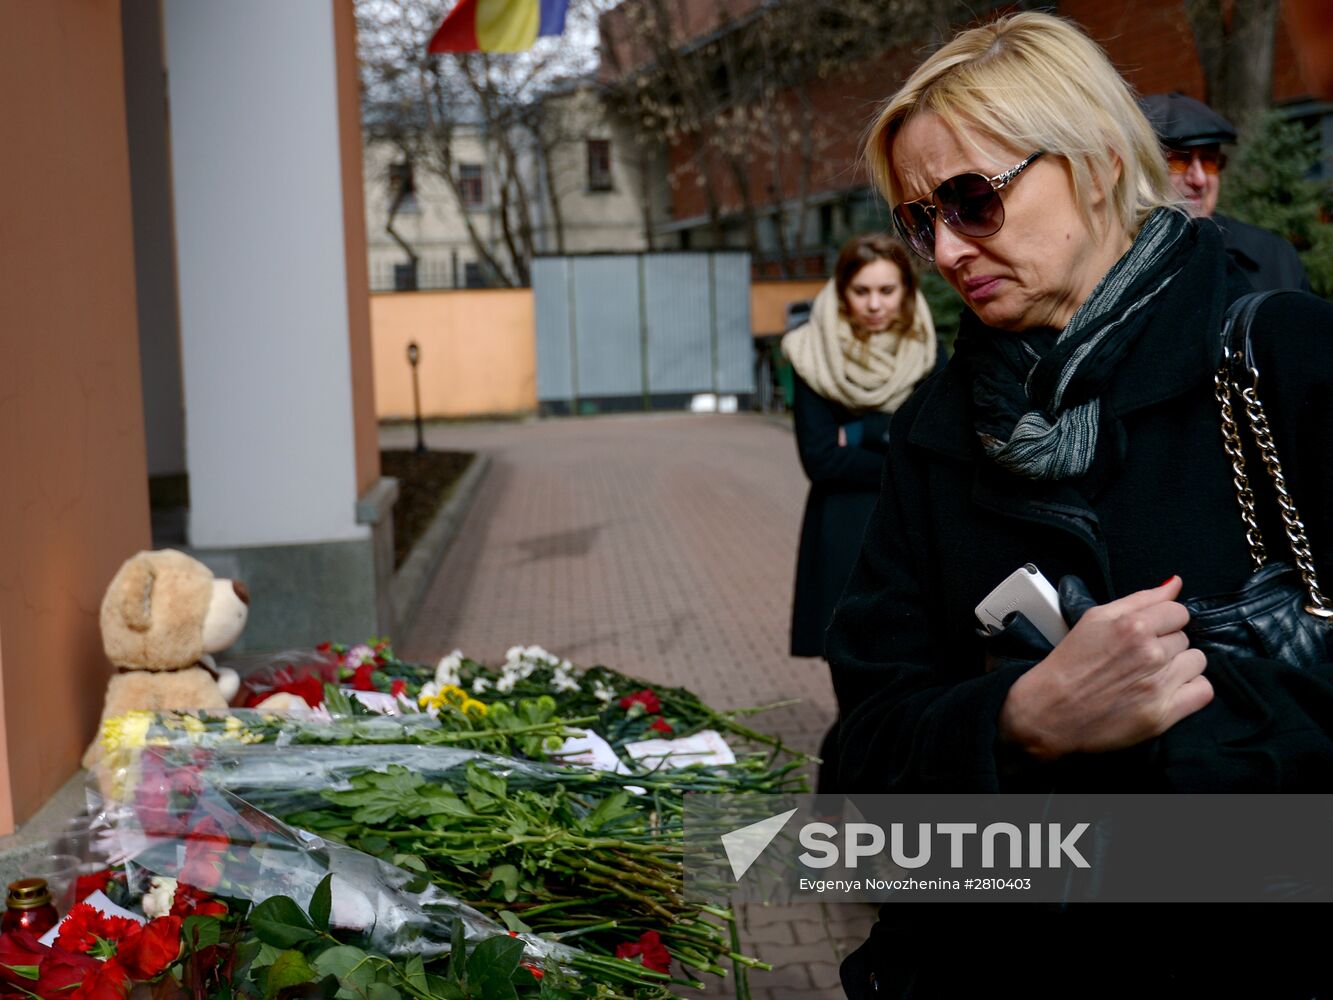 Boeing 737-800 crash victims commemorated outside Moscow's office of Rostov Region delegation